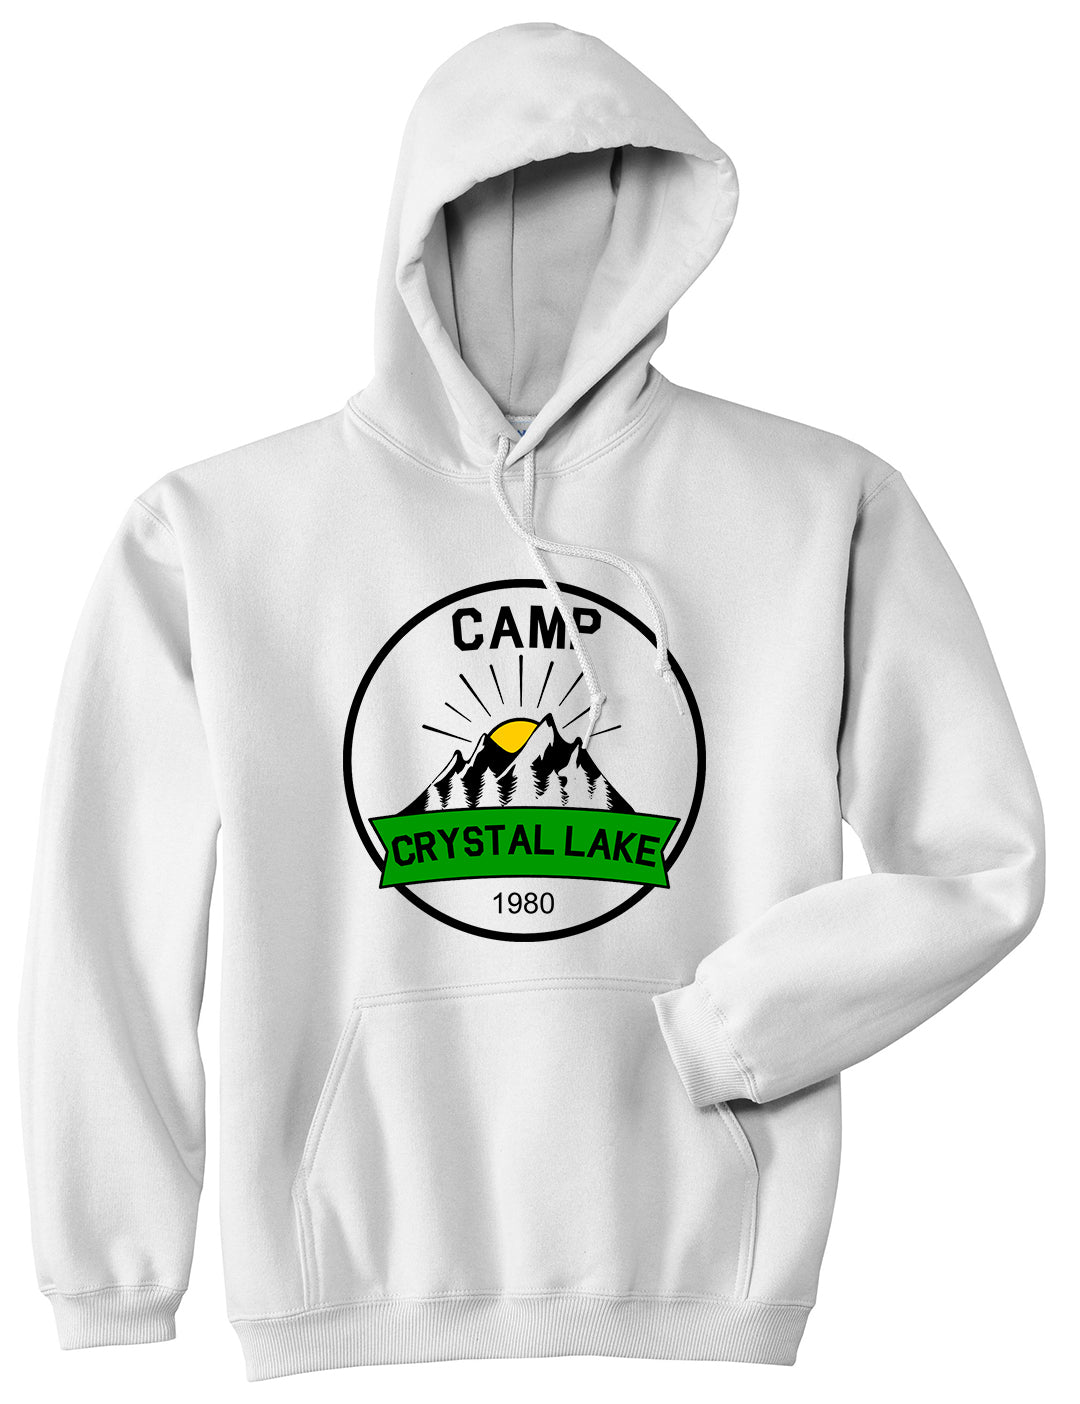 Camp Crystal Lake 1980 Counselor Mens Pullover Hoodie White